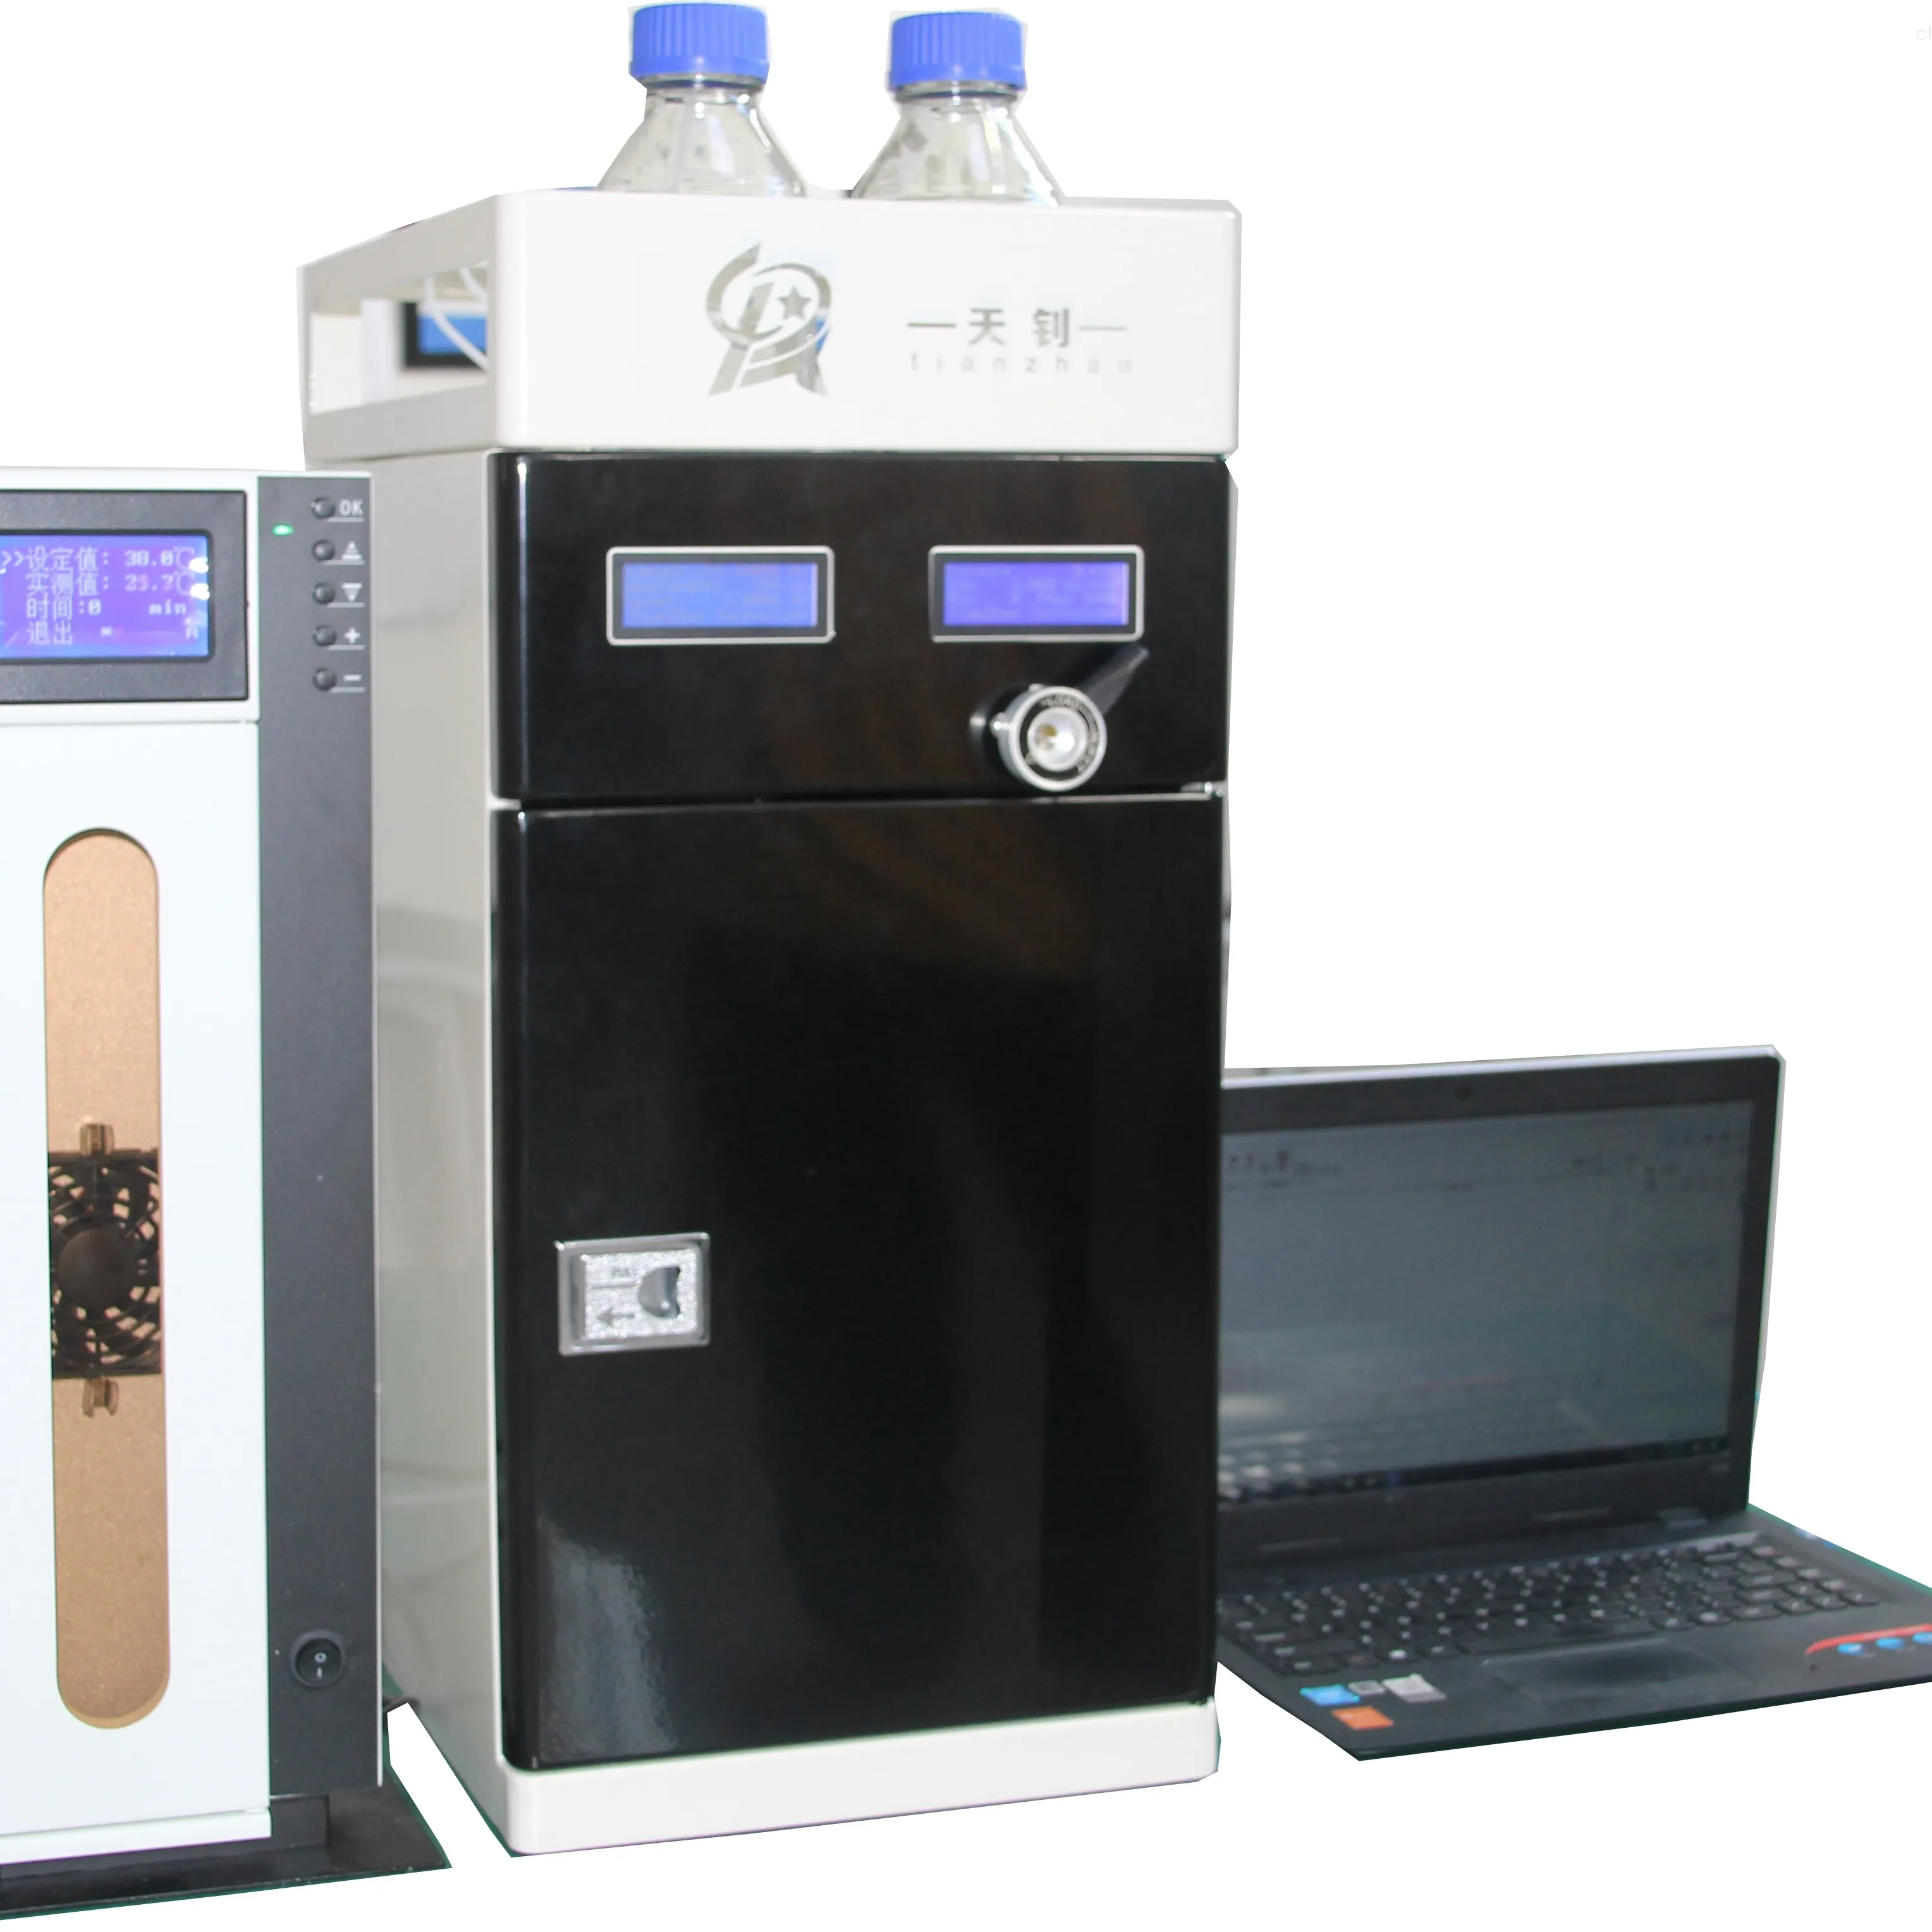 Hot sale HPLC Chromatography equipment for Laboratory analysis used in food/chemical/pharma/medical industries